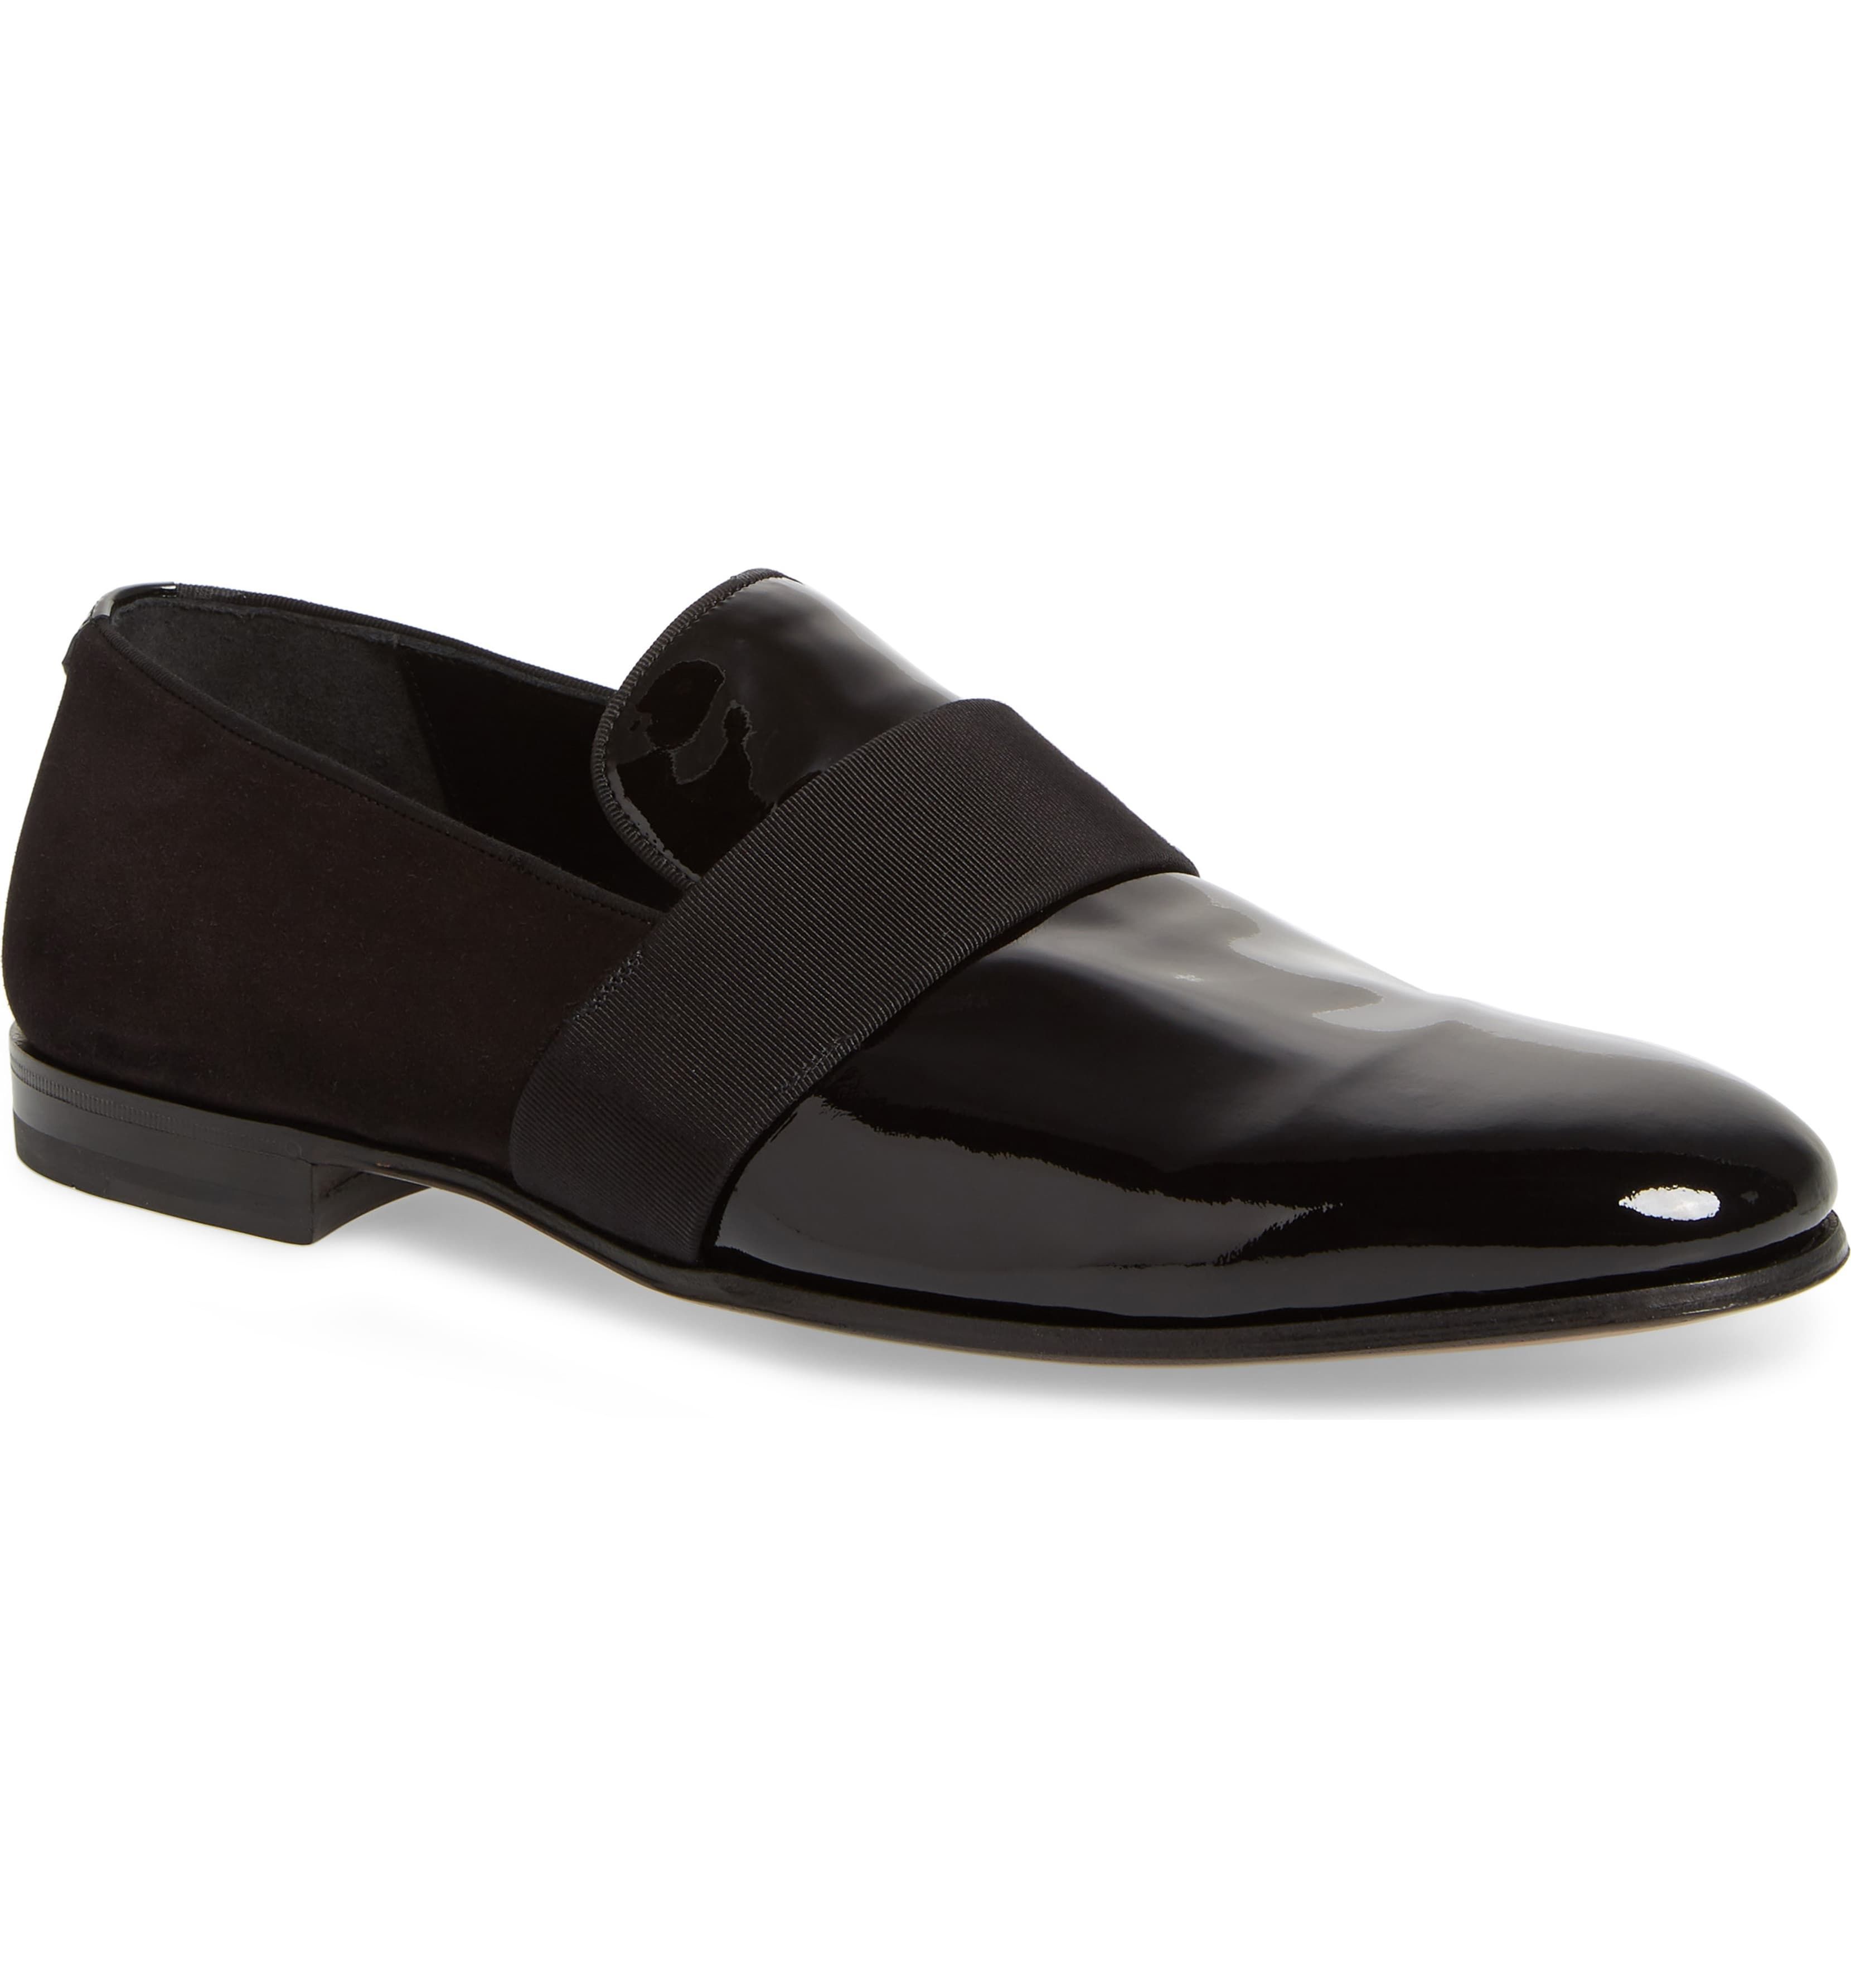 non patent leather shoes with tuxedo